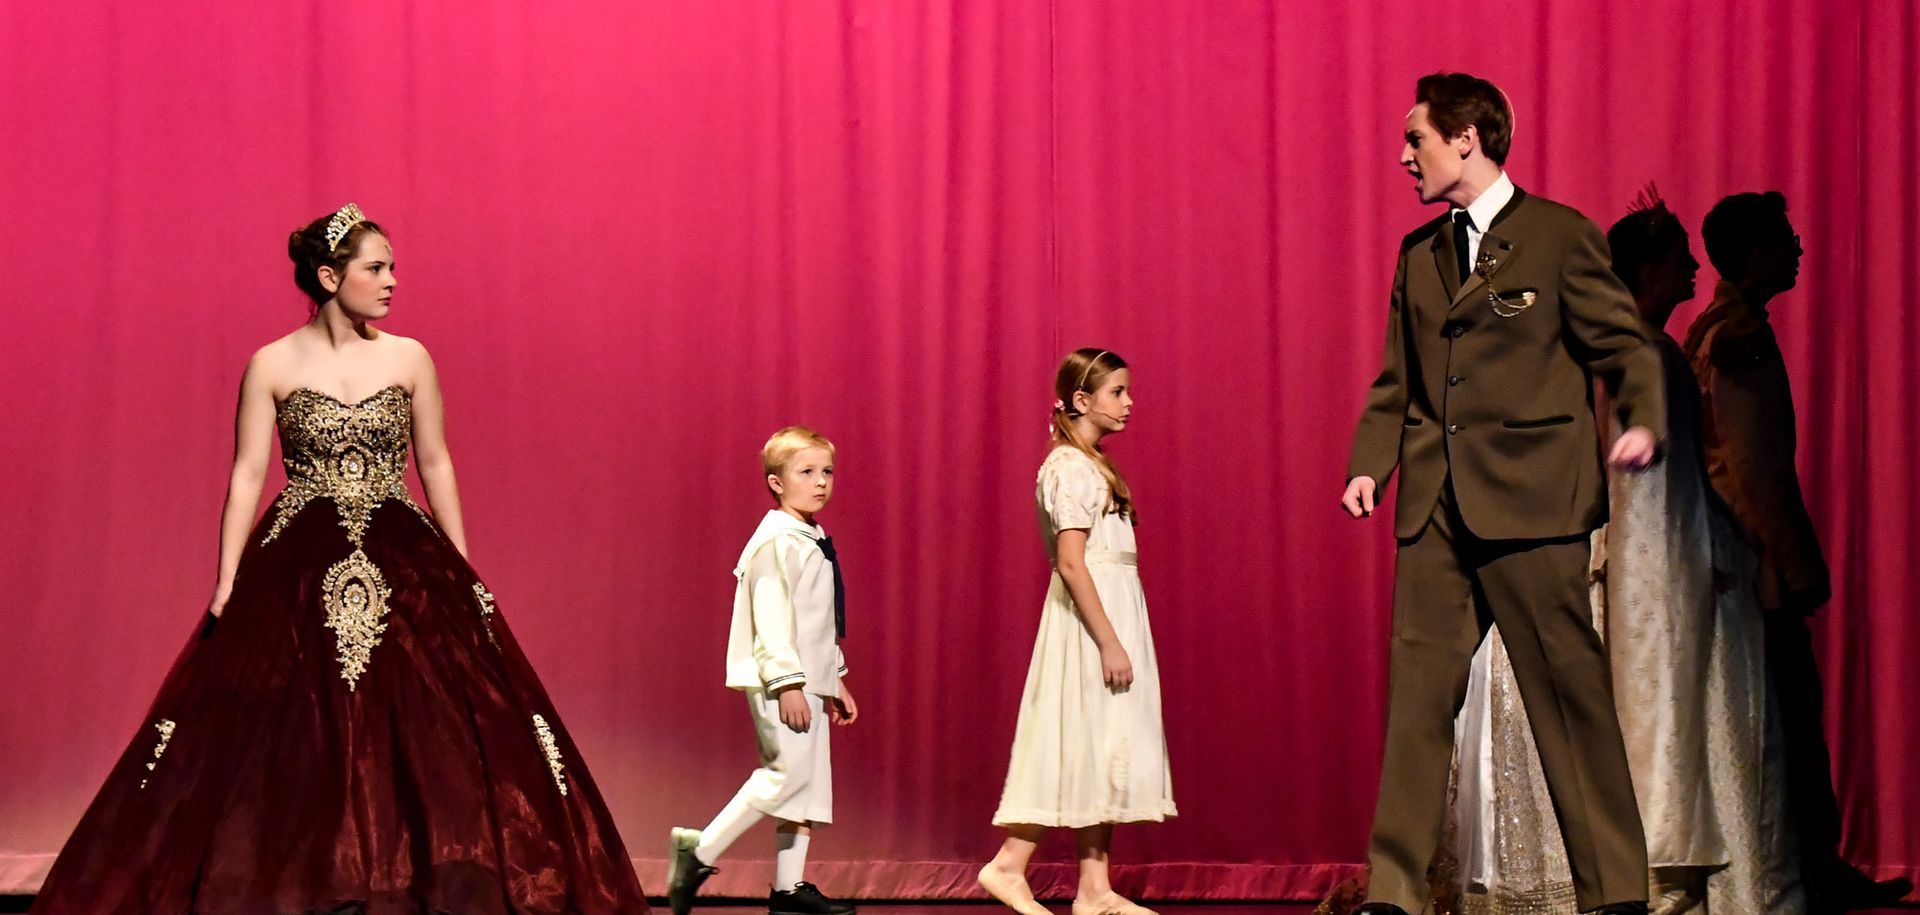 Anastasia and other characters on the FVL stage during the performance of the musical